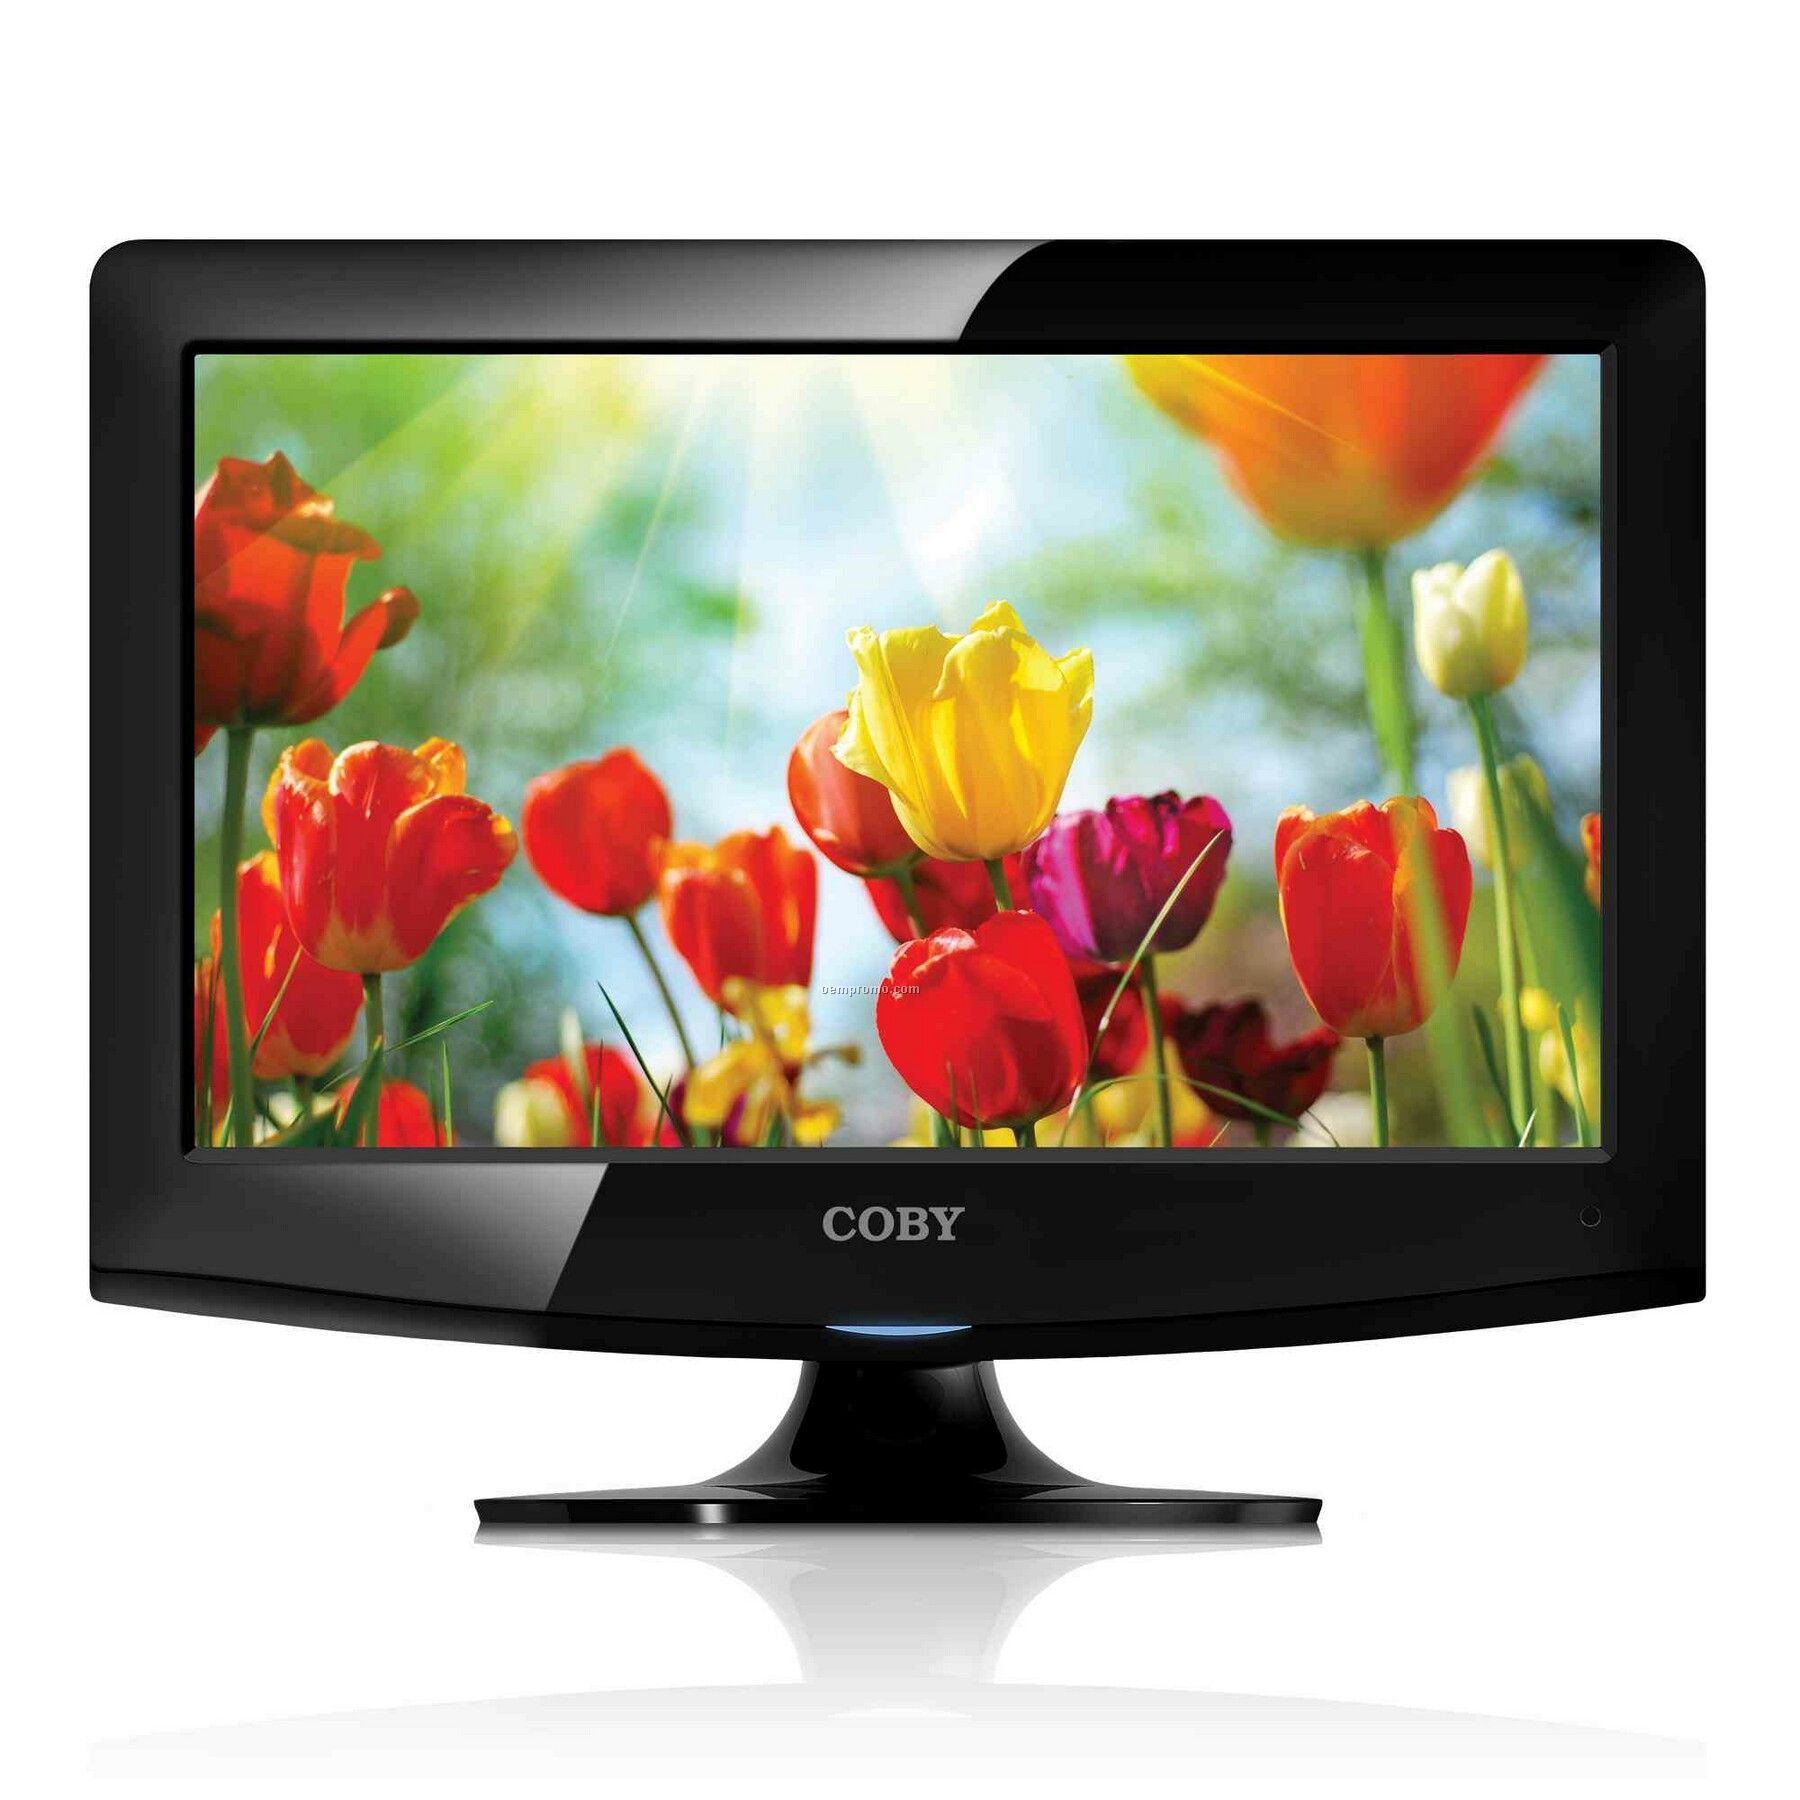 15" Class LED High-definition Tv